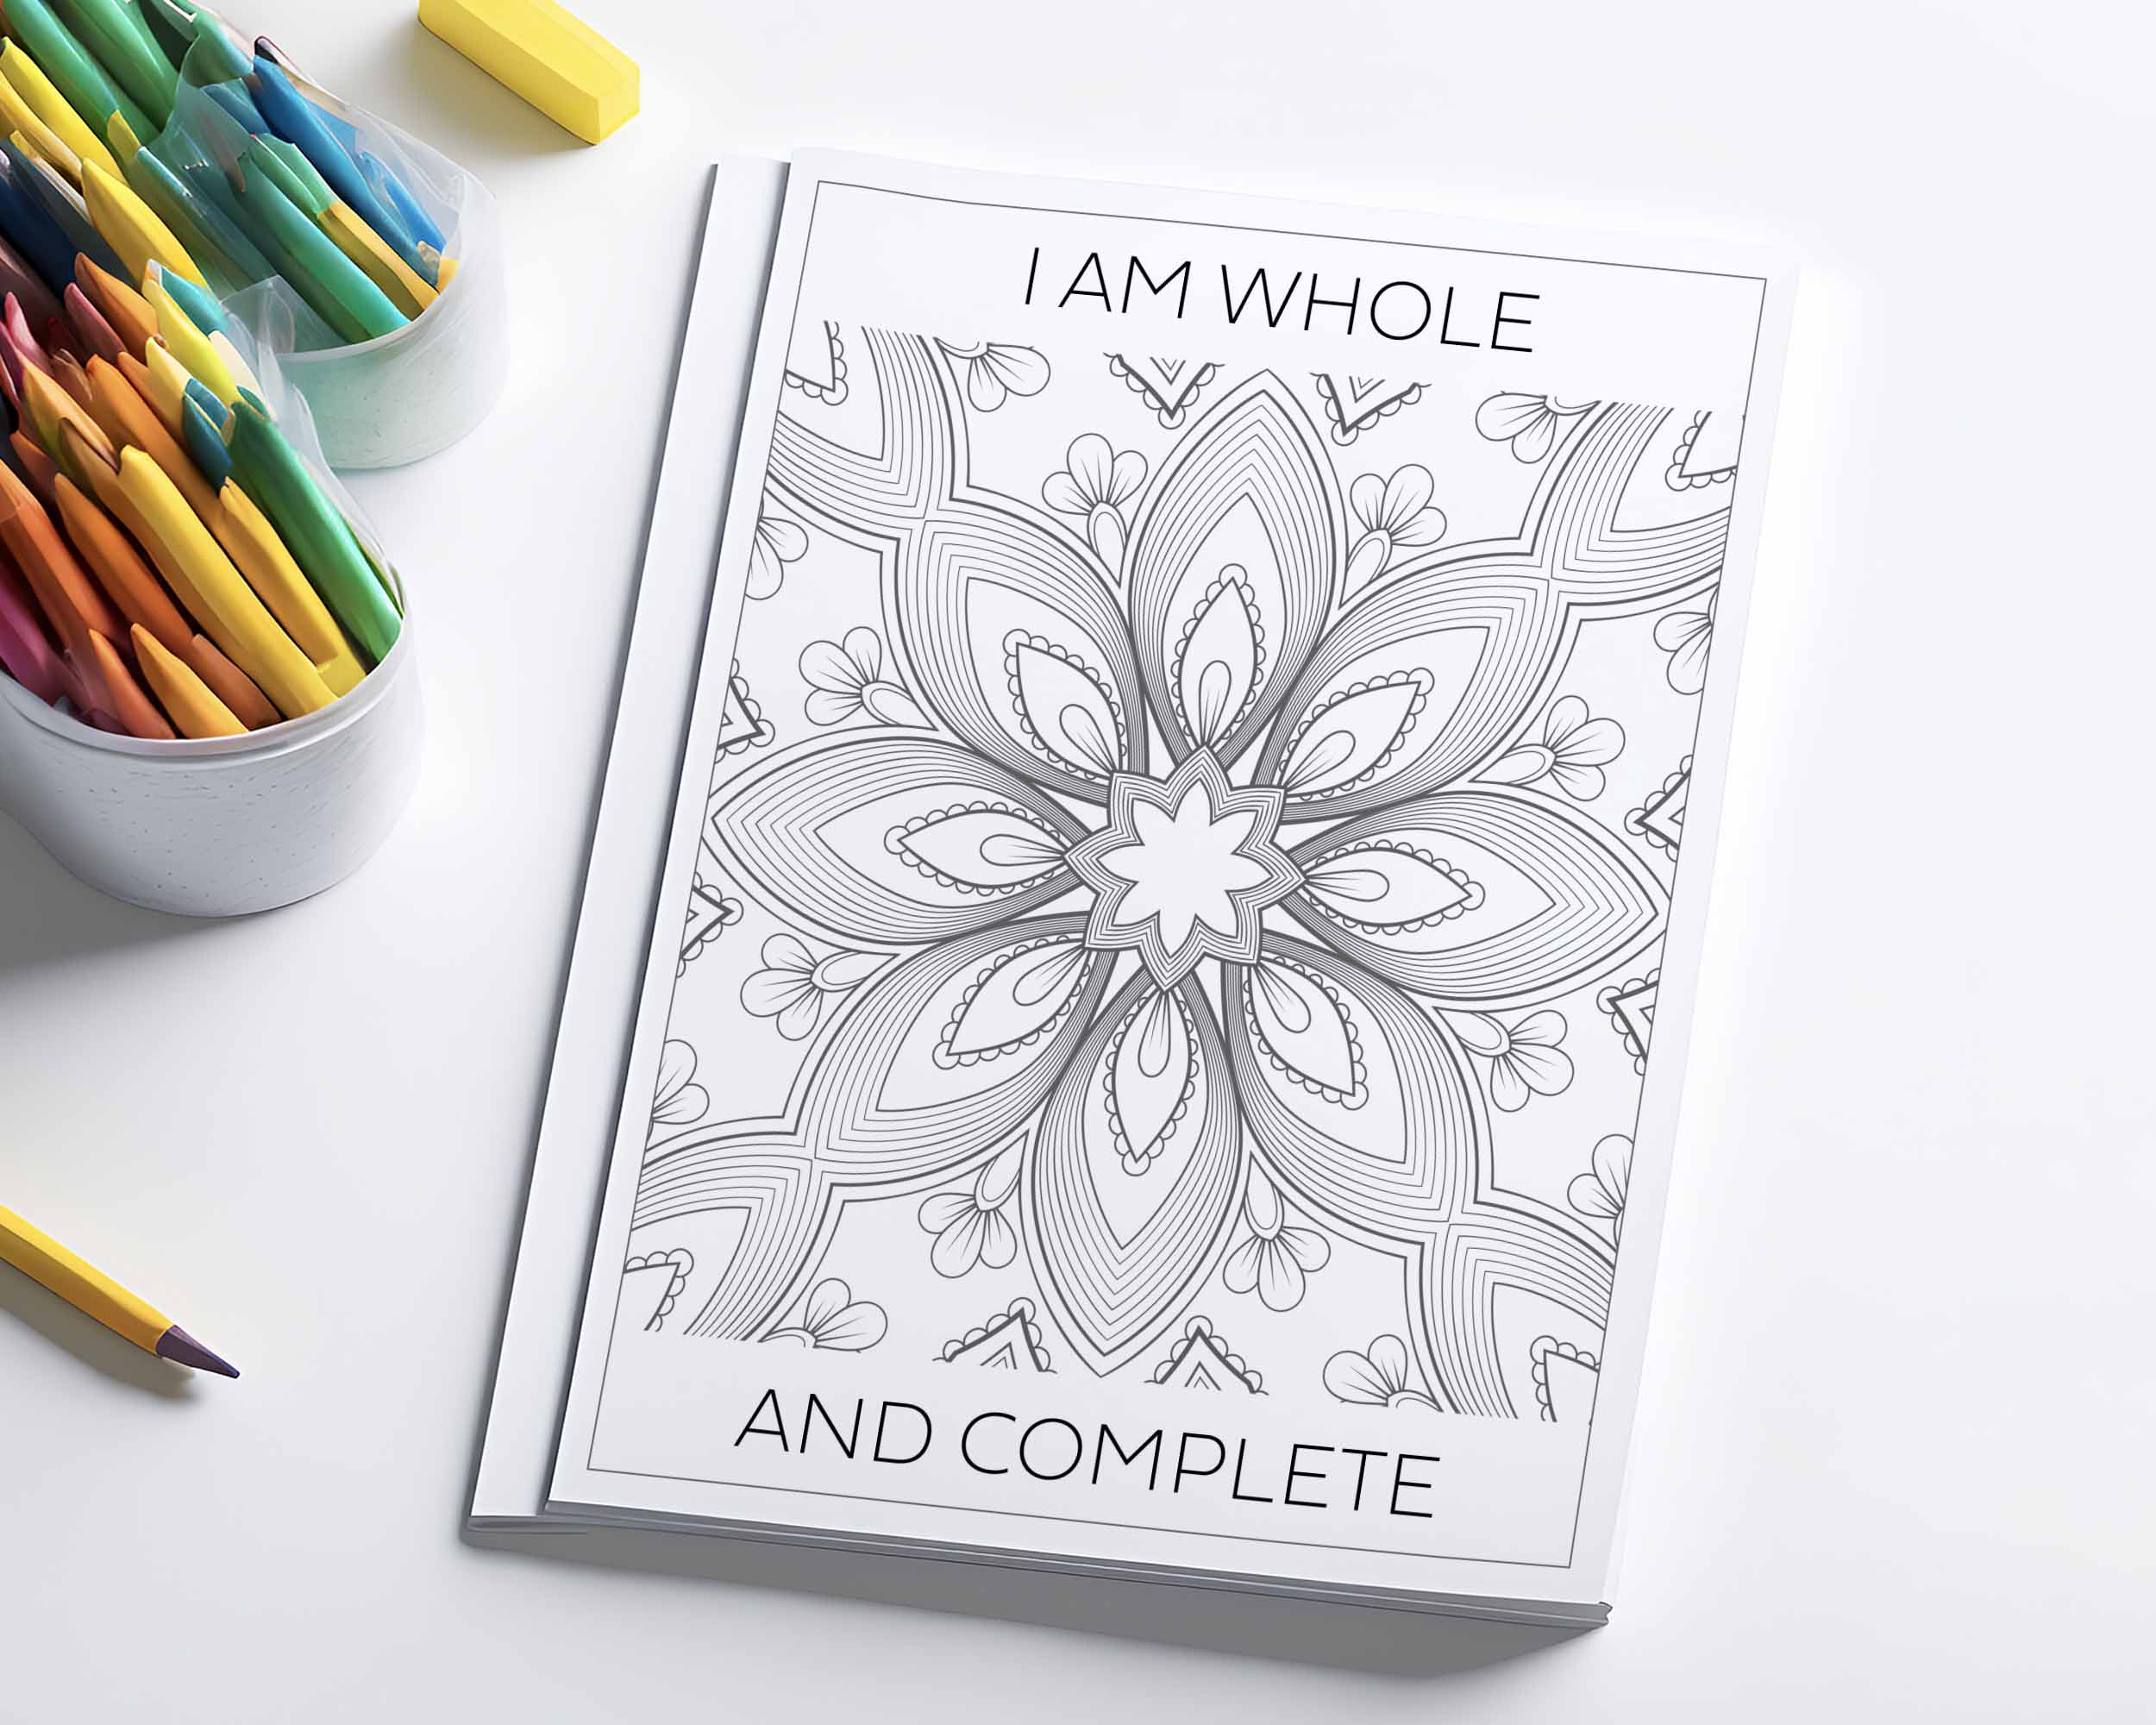 Printable anxiety relief coloring sheet.